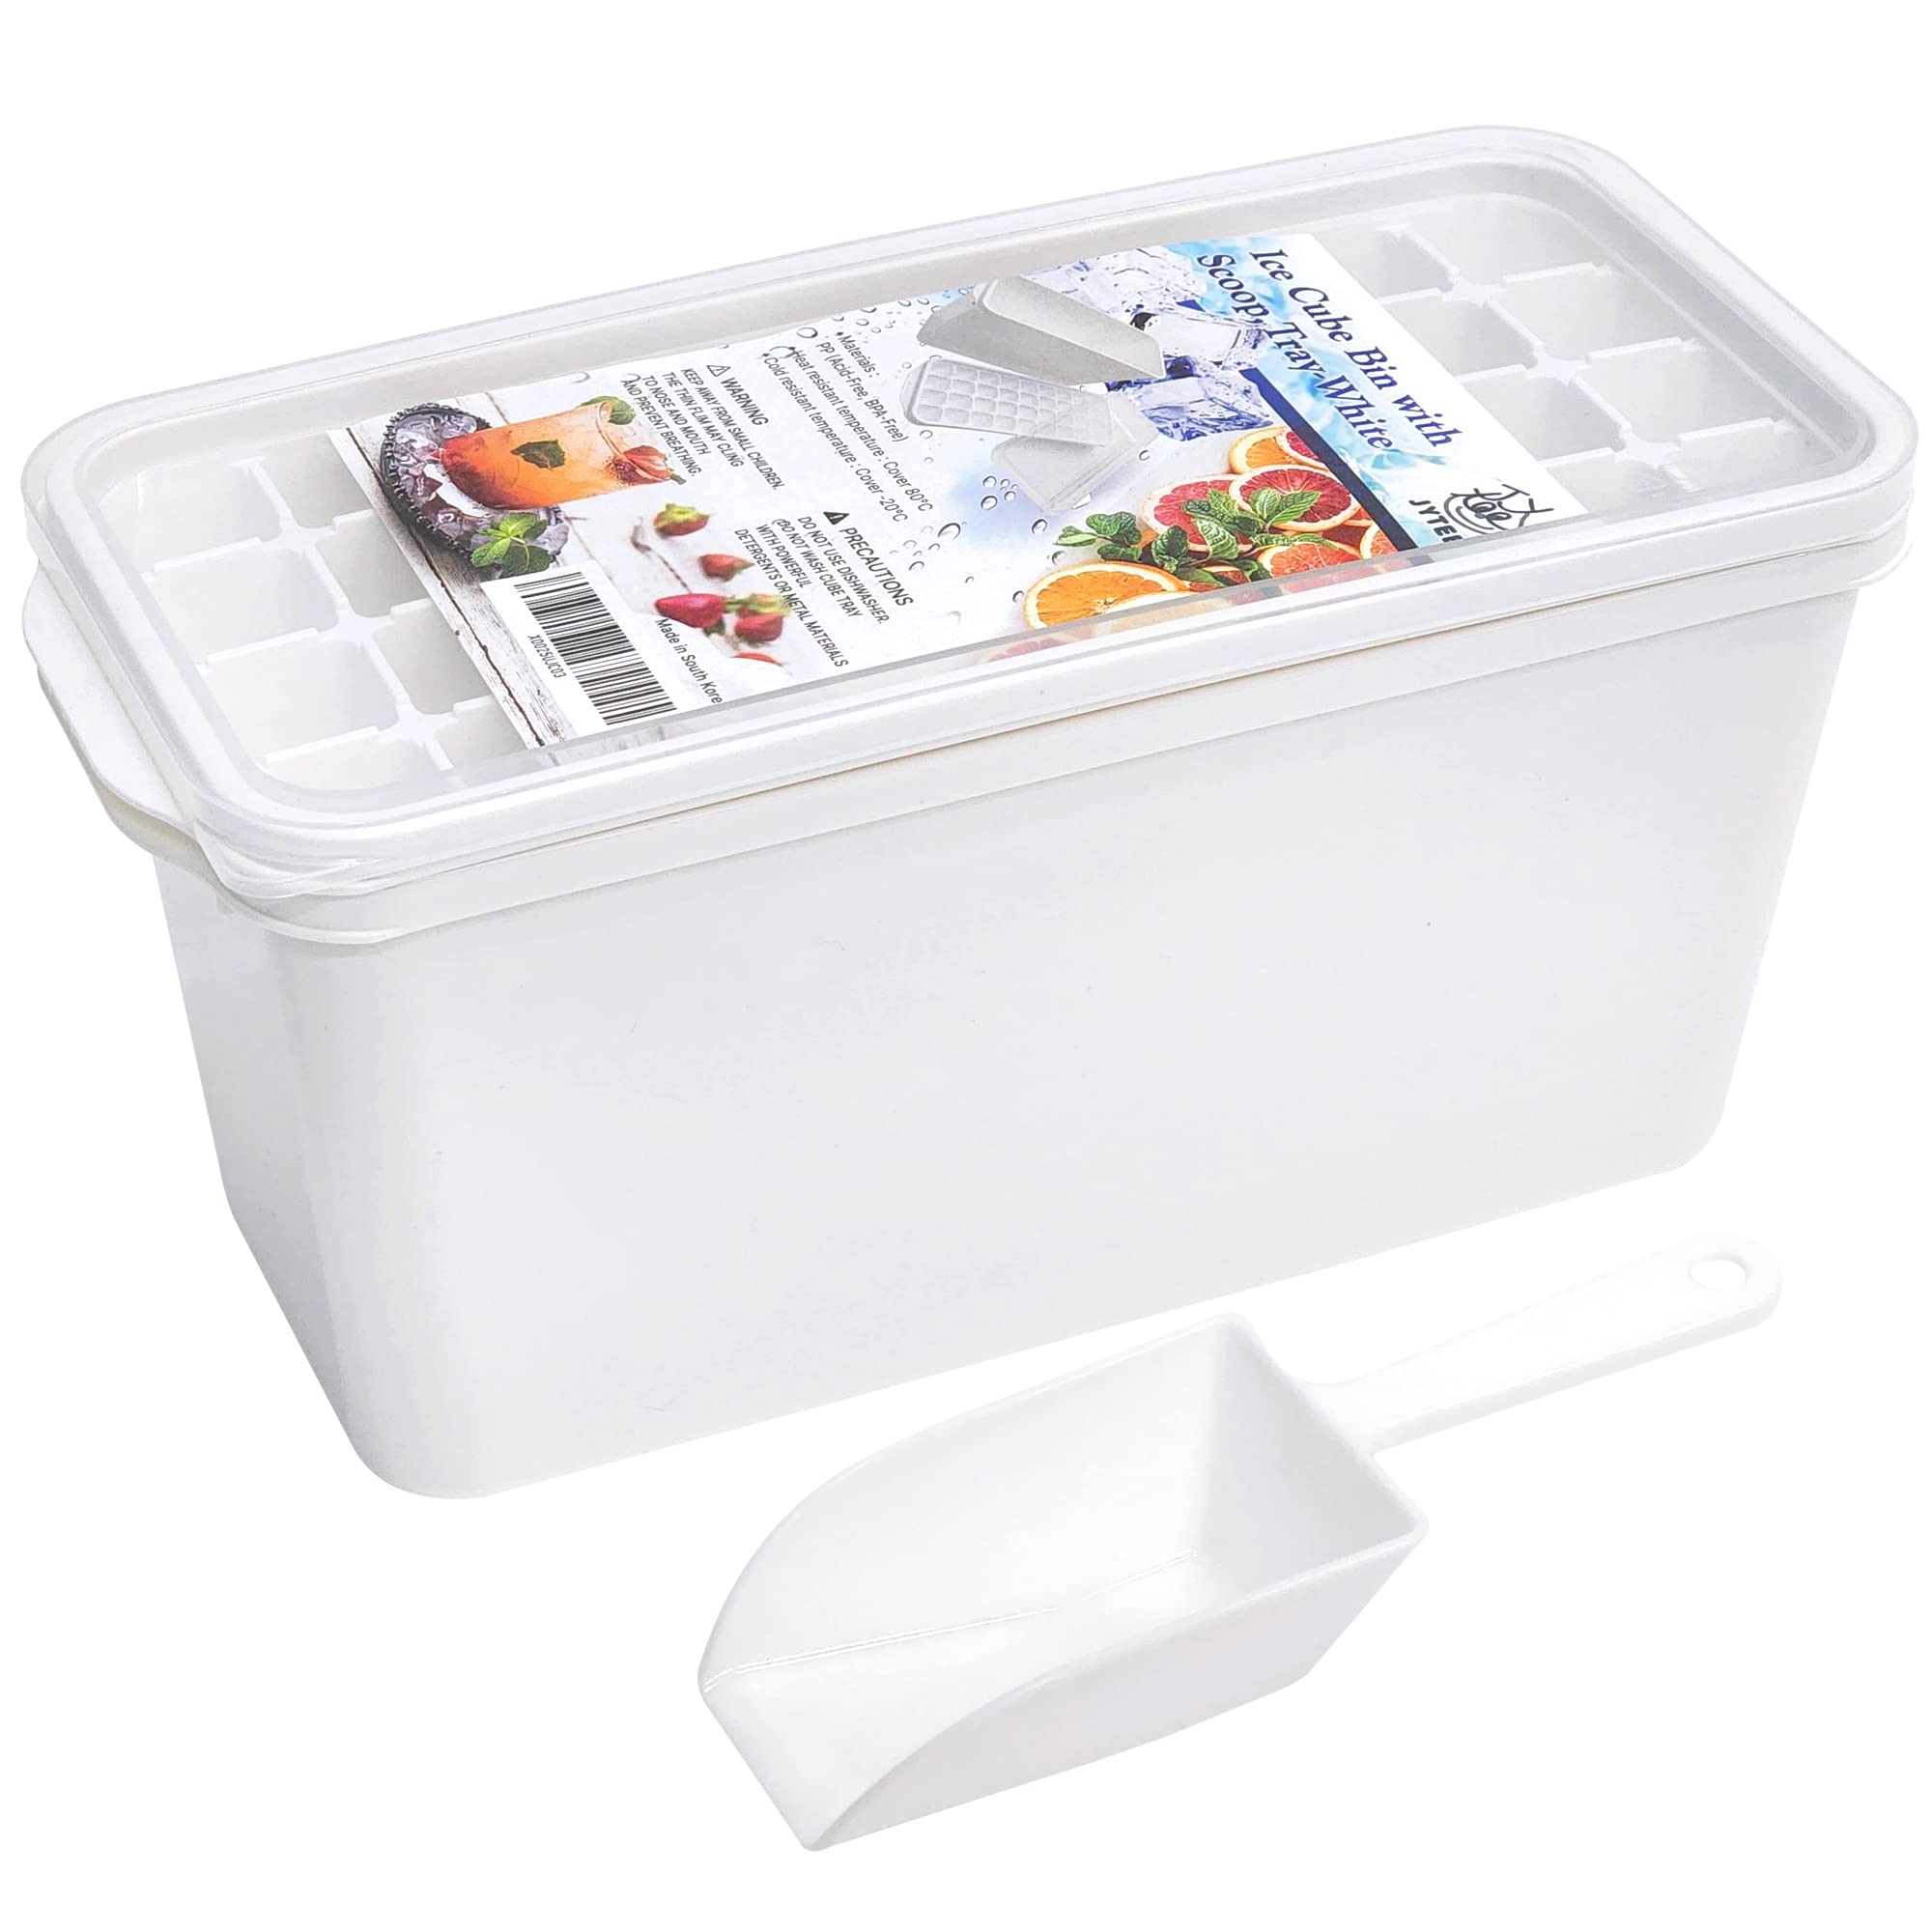 ice cube bin with lid for freezer